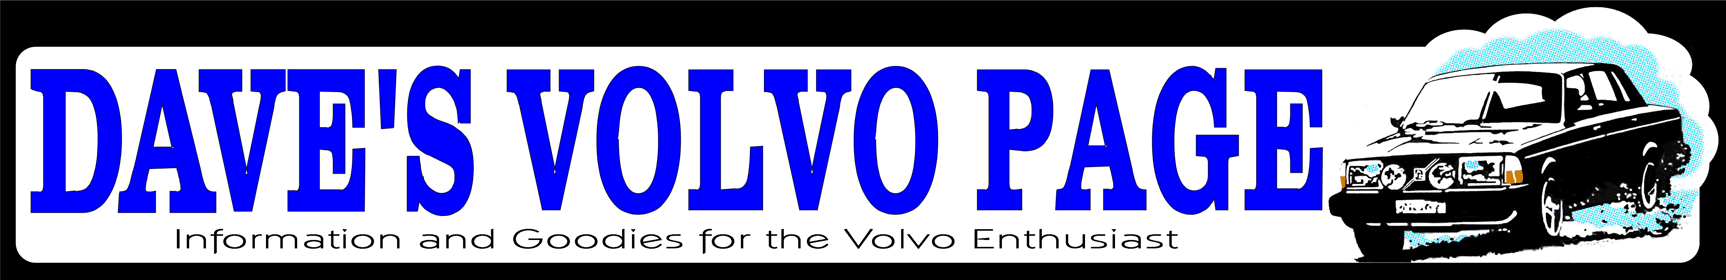 DAVES VOLVO PAGE